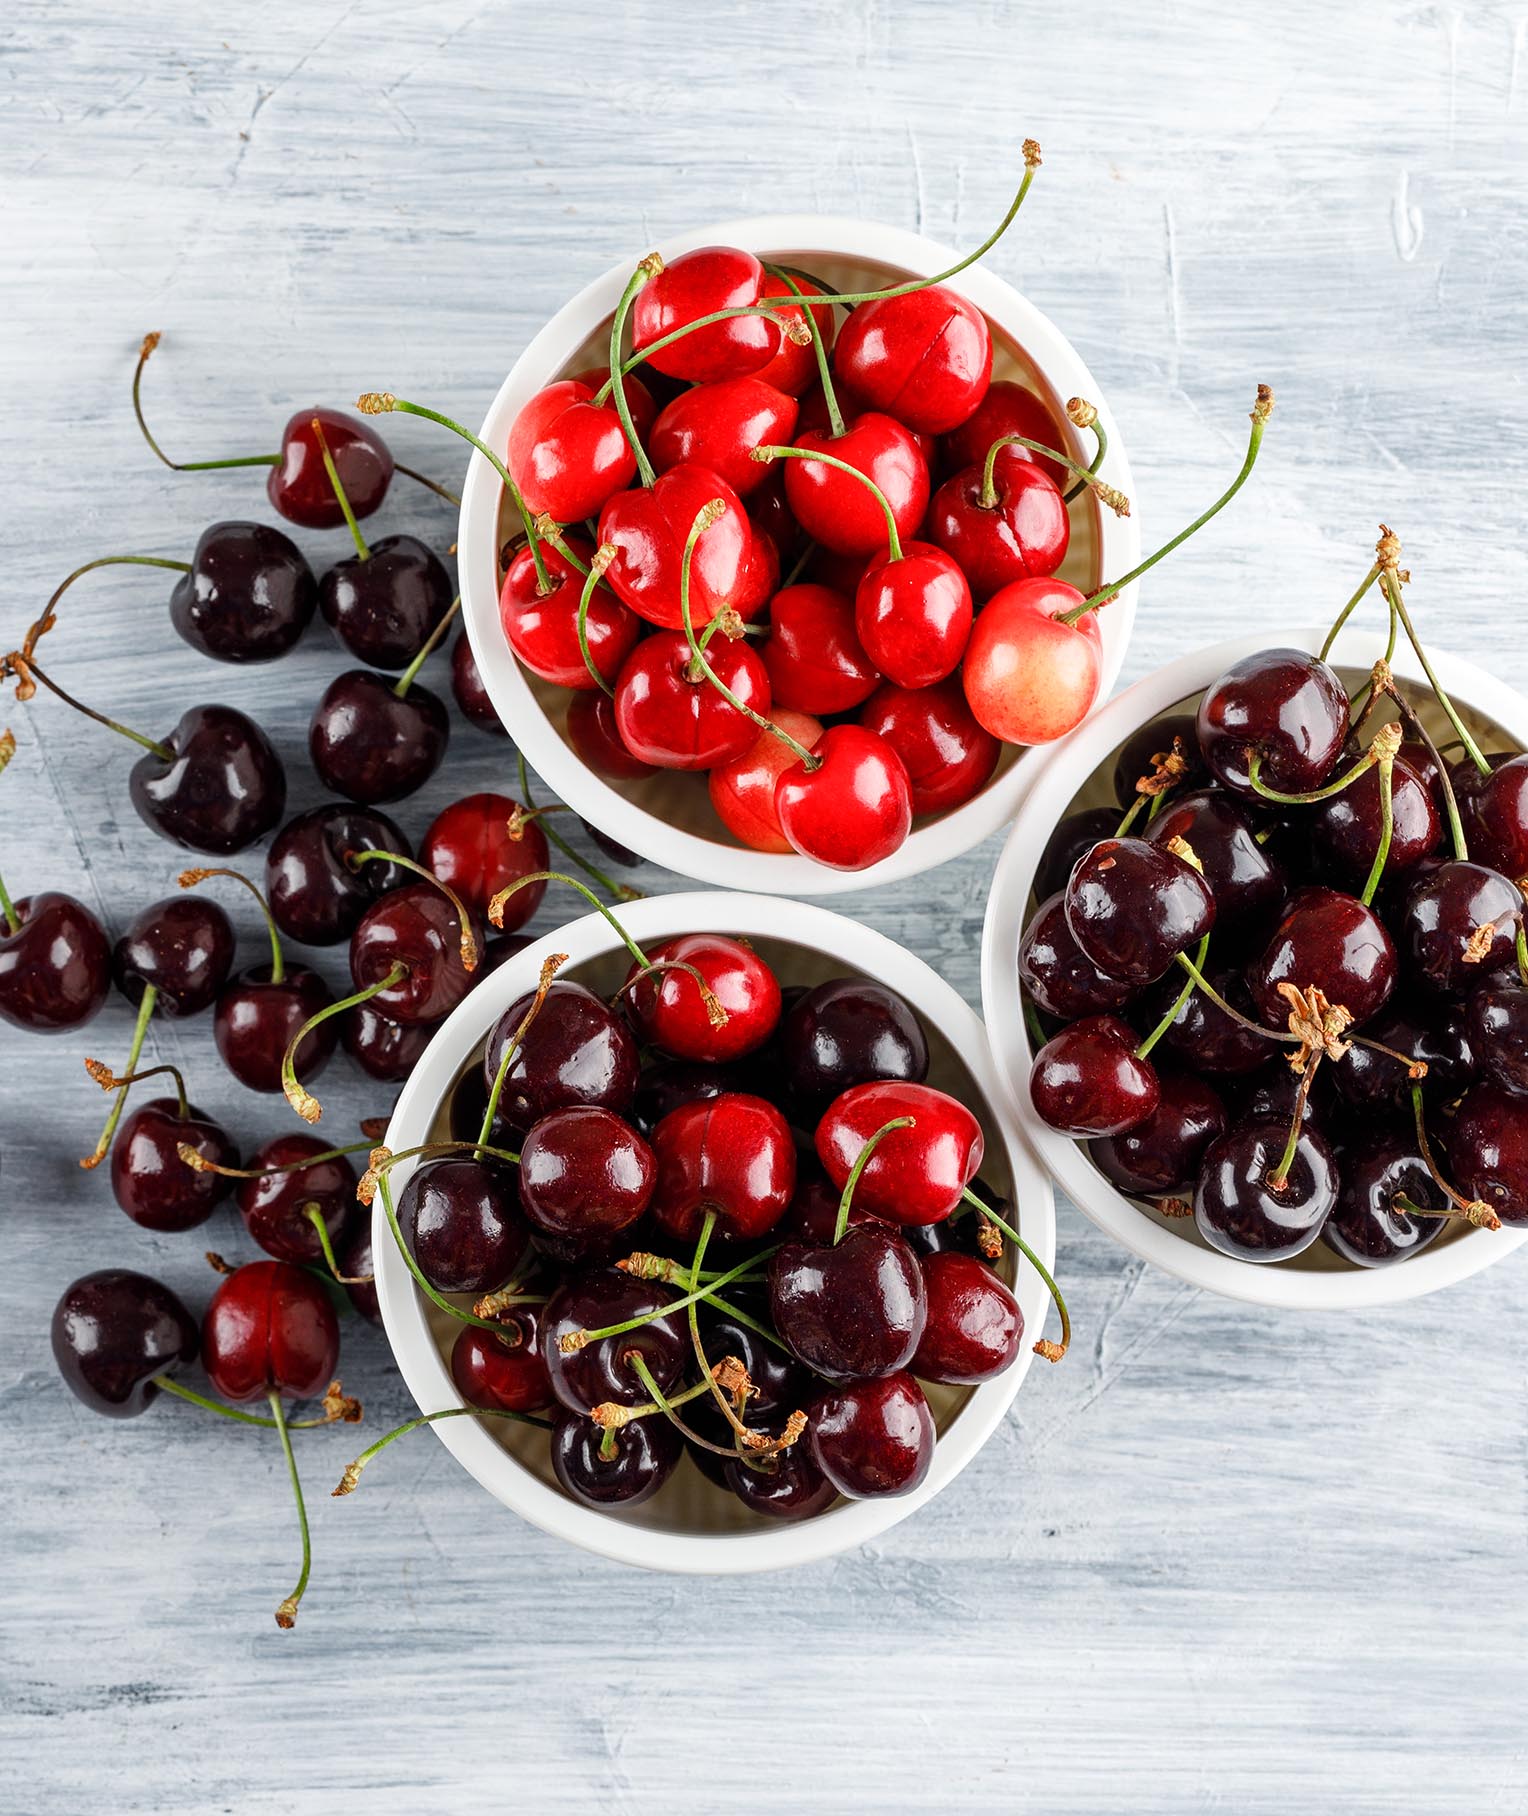 What Is the Difference Between Tart Cherries and Sweet Cherries